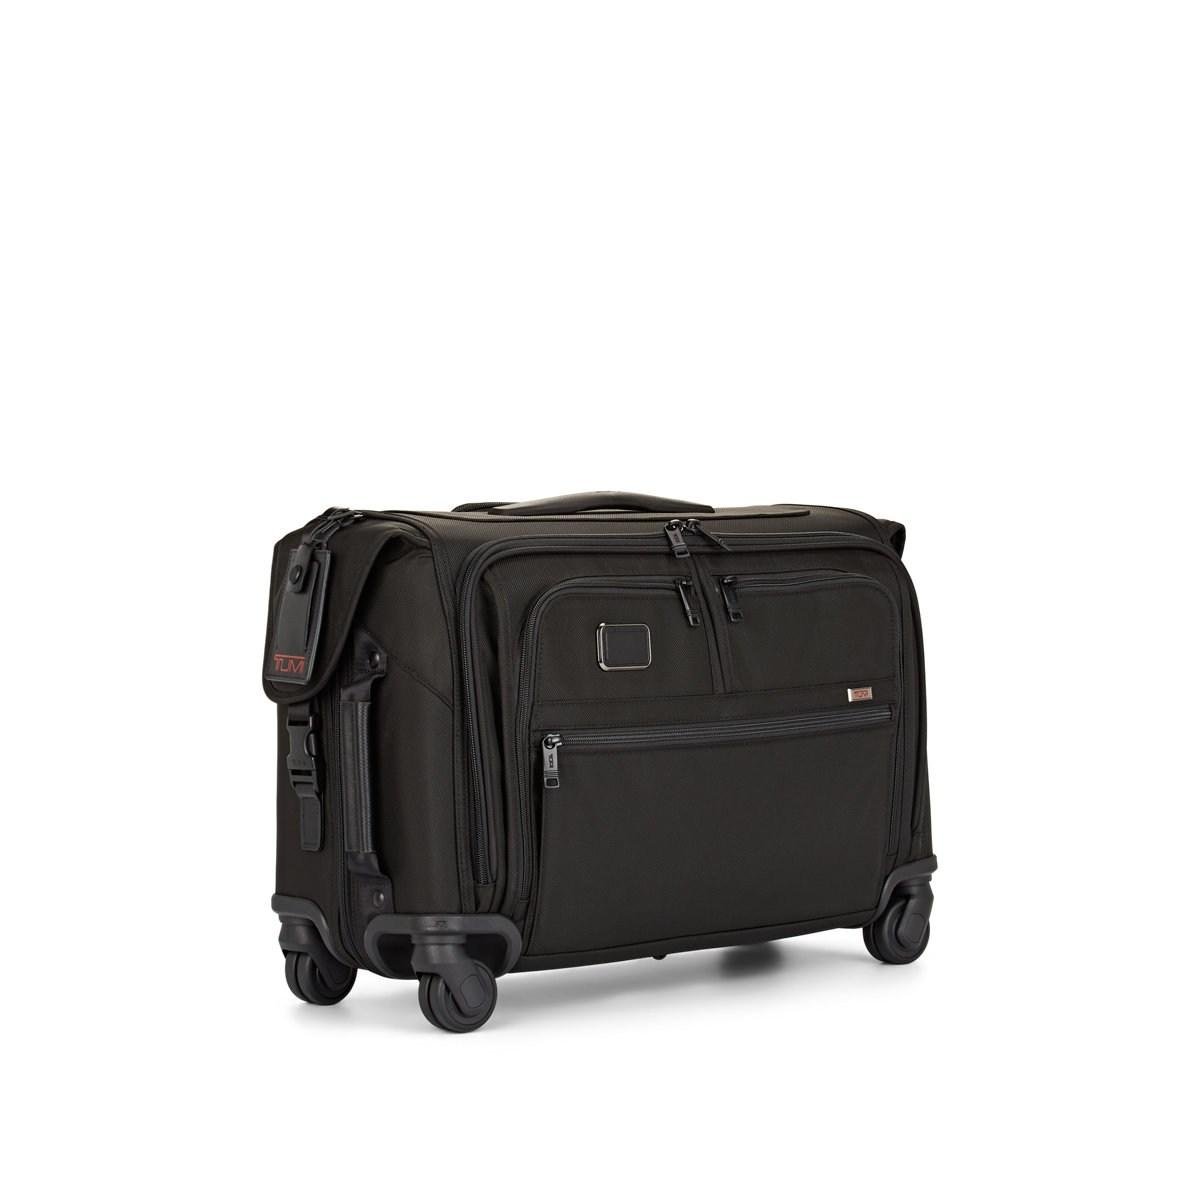 Tumi Synthetic Alpha 3 Wheeled Carry-on Garment Bag in Black for Men - Lyst